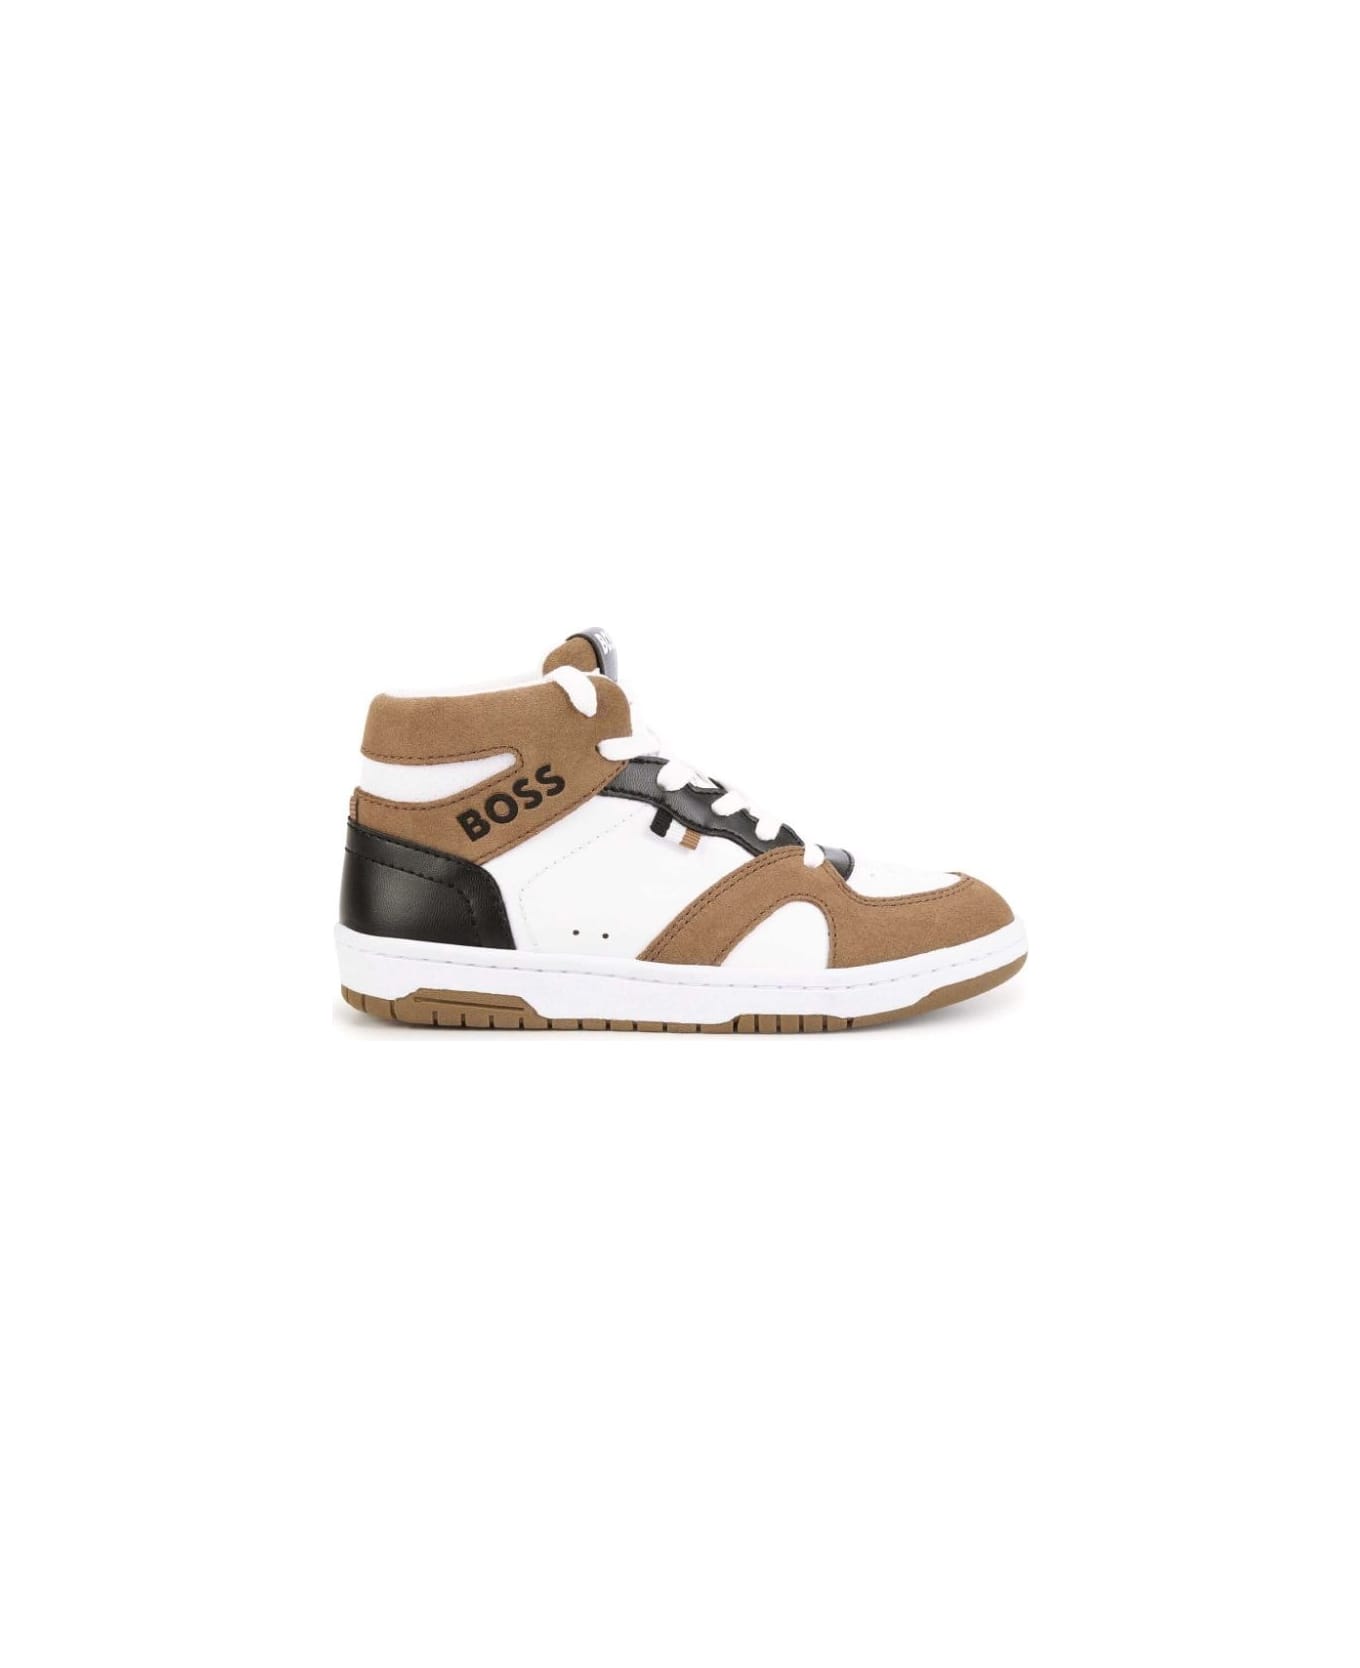 Hugo Boss Multicolor Sneakers For Kids With Logo - Multicolor